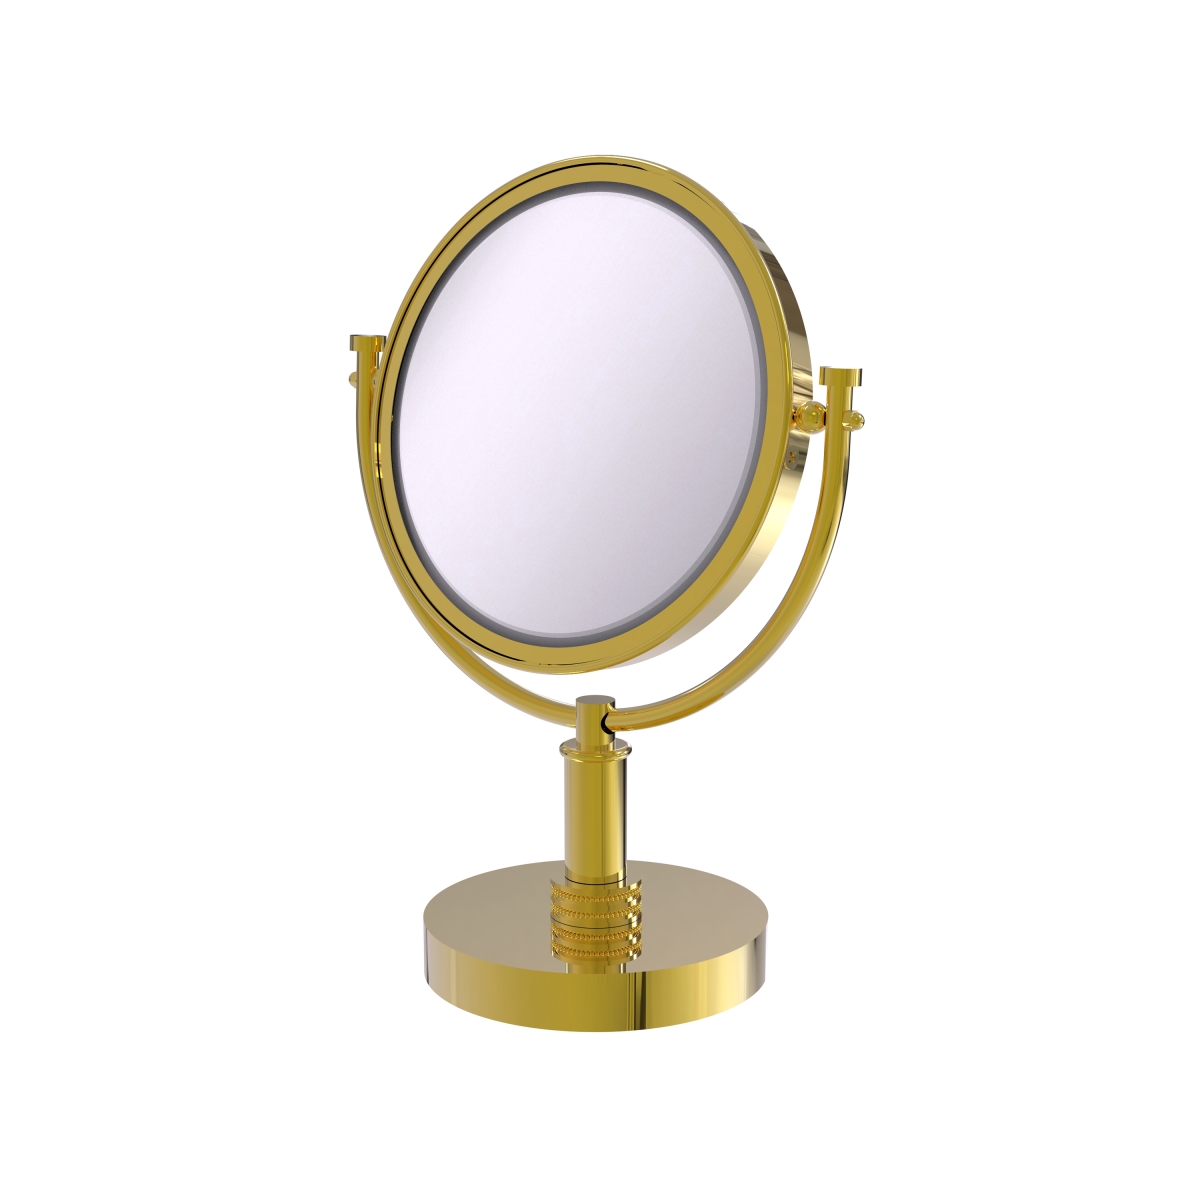 Dm-4d-4x-unl Dotted Ring Style 8 In. Vanity Top Make-up Mirror 4x Magnification, Unlacquered Brass